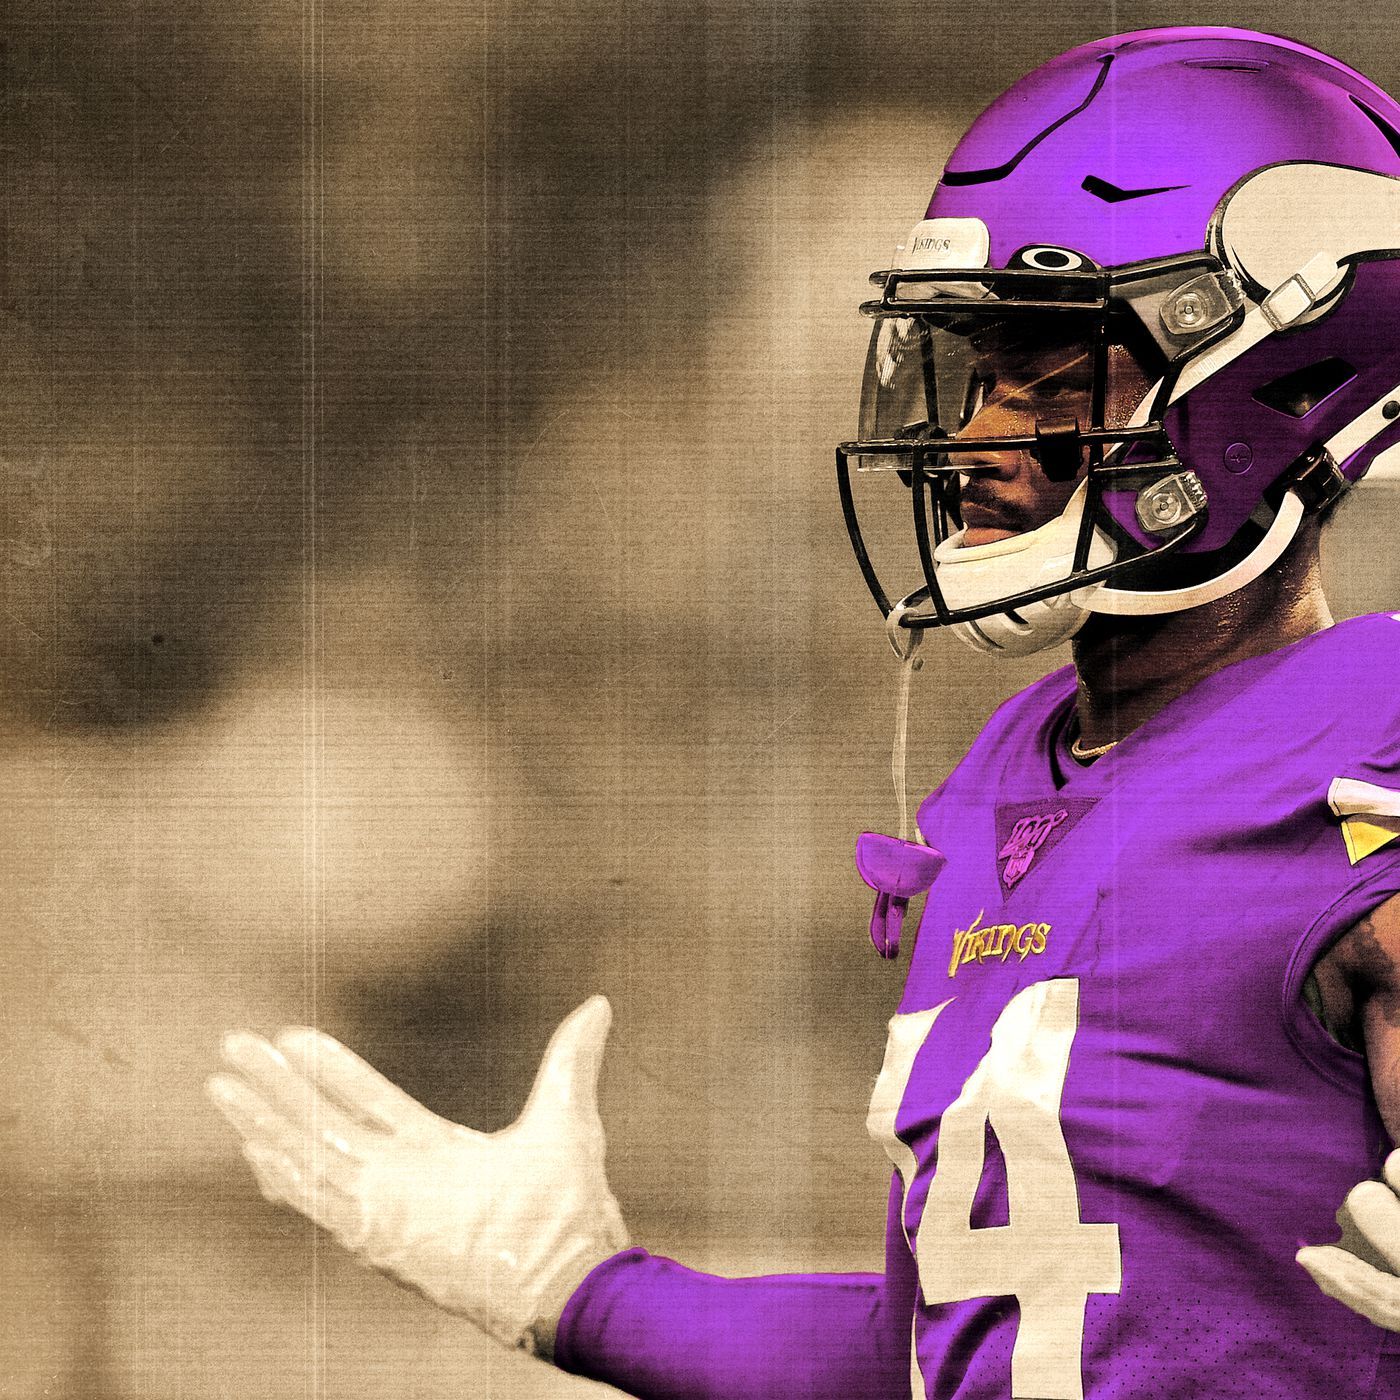 Stefon Diggs Is Mad As Hell. Where Do the Vikings Go From Here?